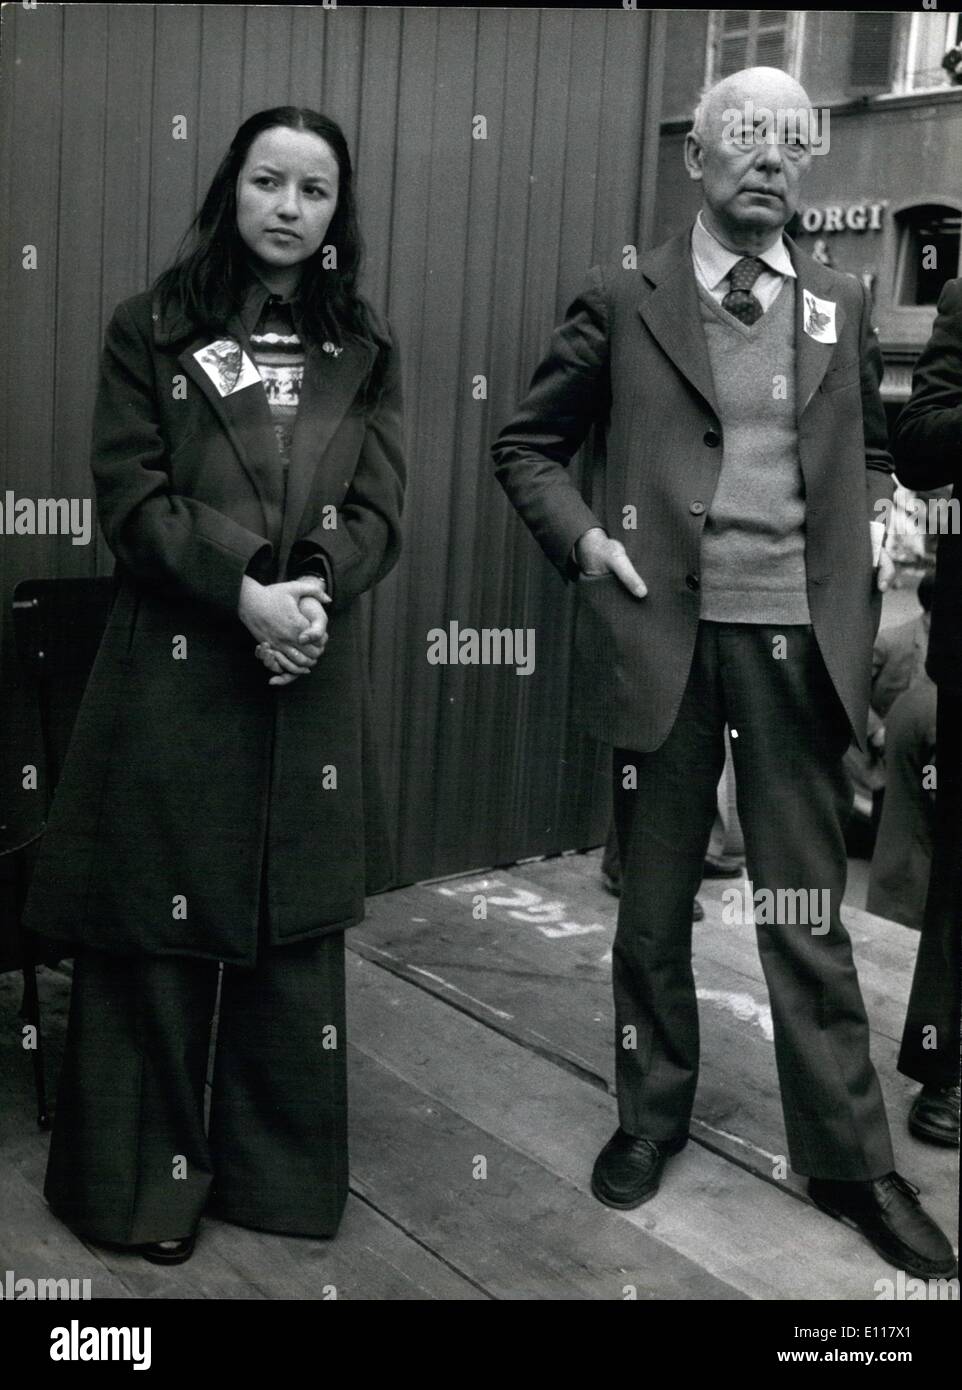 Apr. 04, 1976 - Rome: The daughter of Chile communist leader Luis Corvalan, Viviana, is in Rome to attend at the manifestation organized by the Italian Comunust party to claim freedom to the Chilean comunist leader. Photo Shows Viviana Corvalan and the comunist Giancarlo Pajetta. Stock Photo